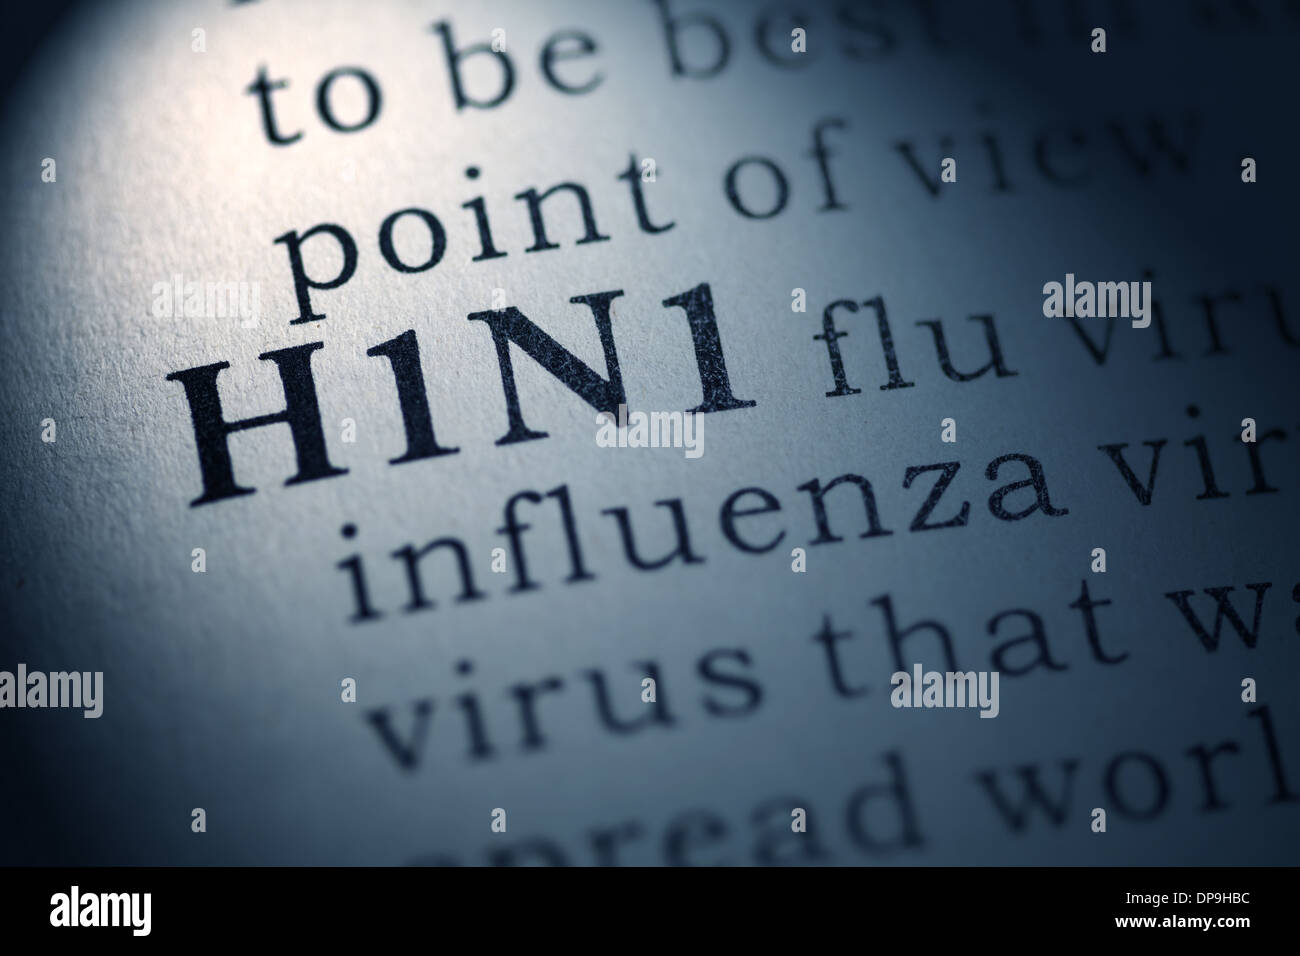 Fake Dictionary, Dictionary definition of the word H1N1 flu. Stock Photo